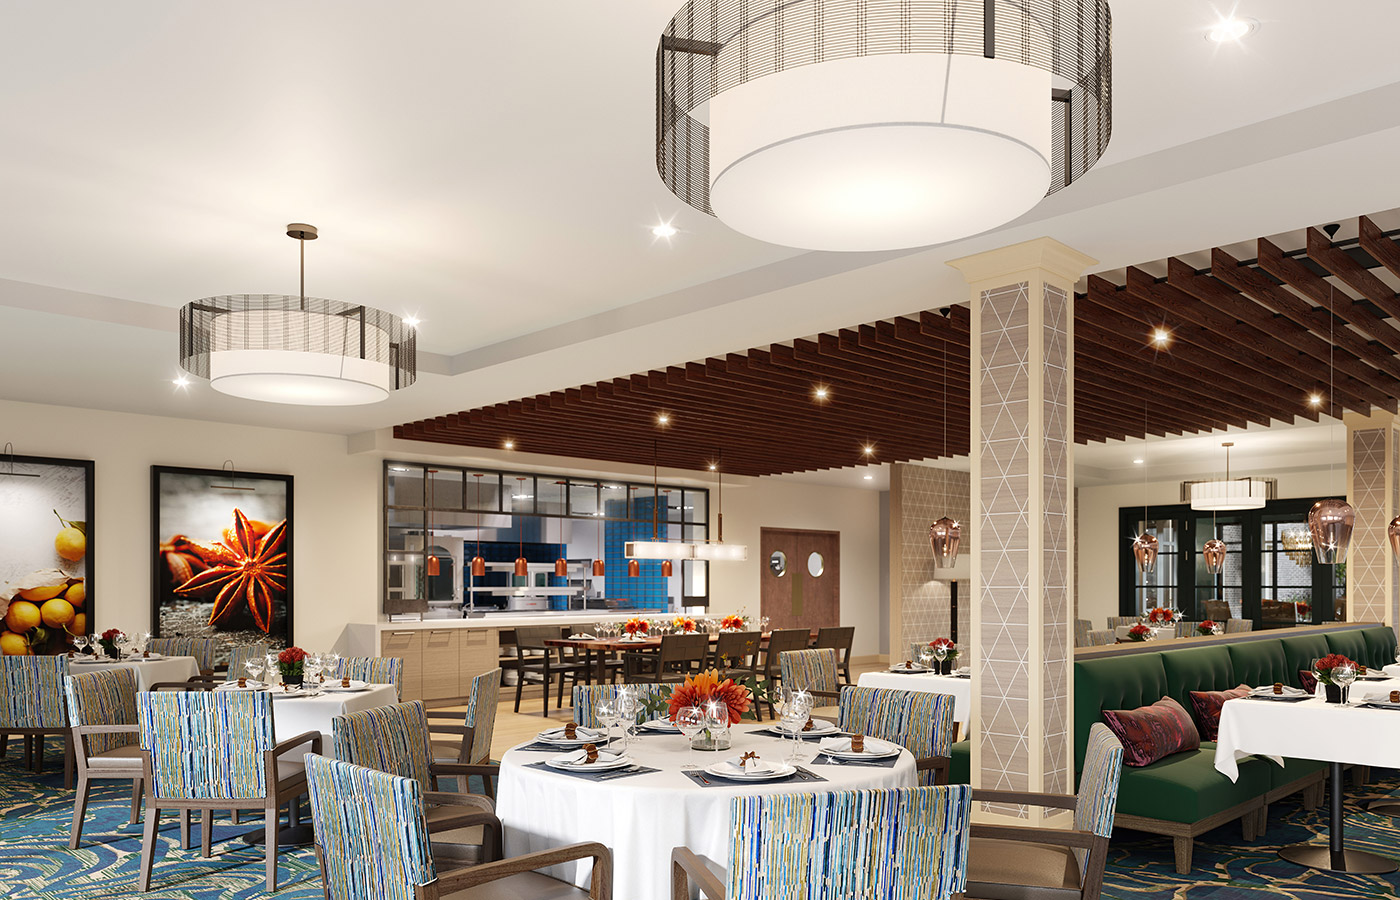 The dining area at The Skybridge at Town Center.